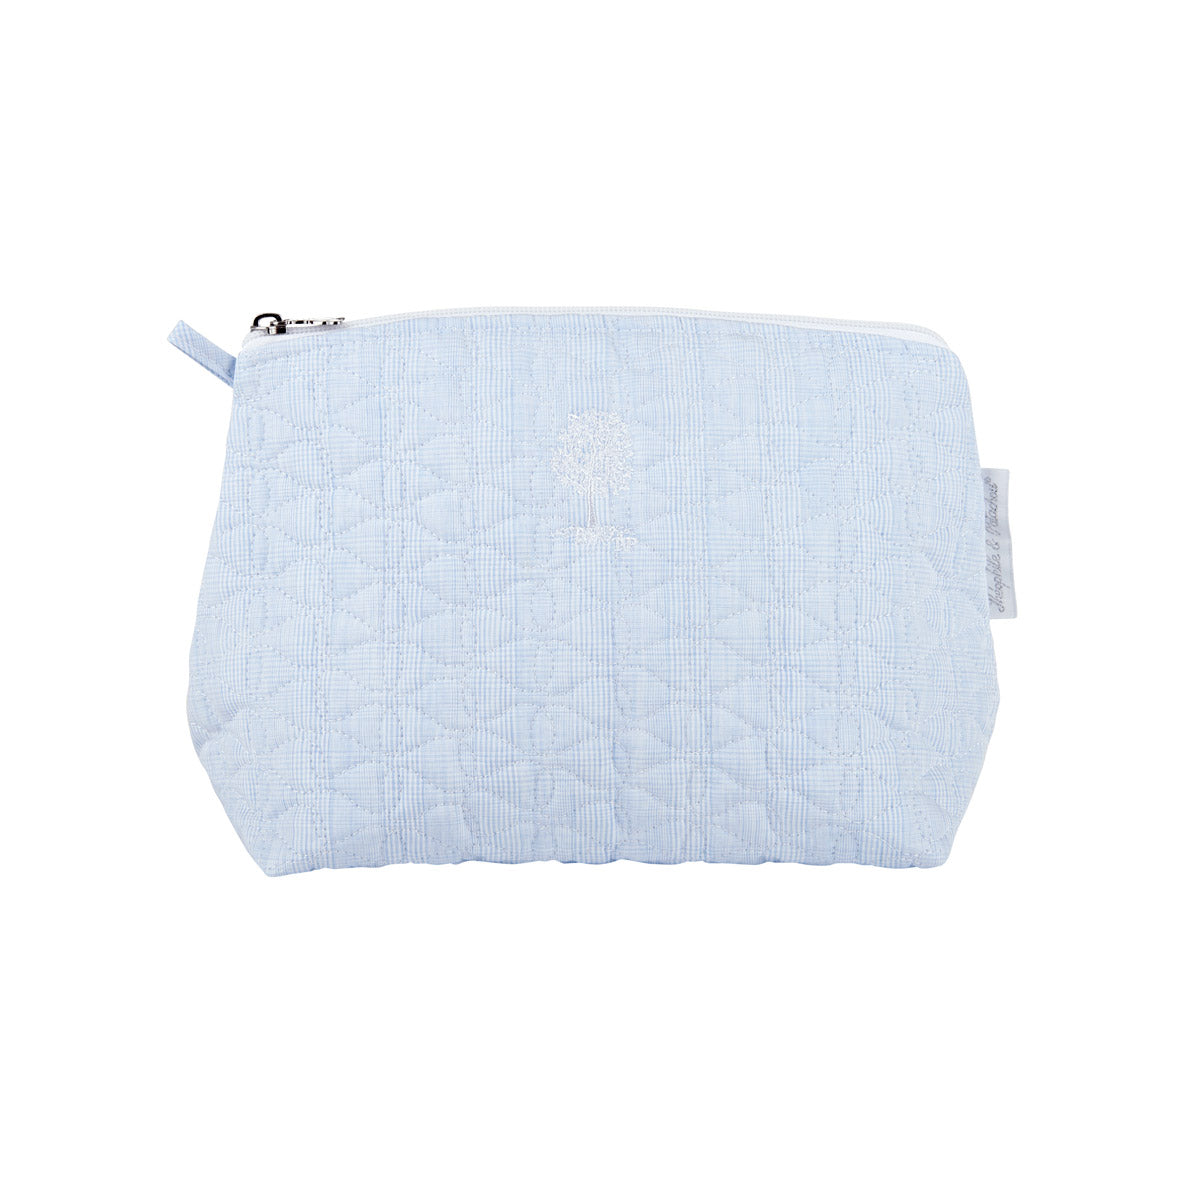 Theophile & Patachou Toilet Bag Quilted - Sweet Blue